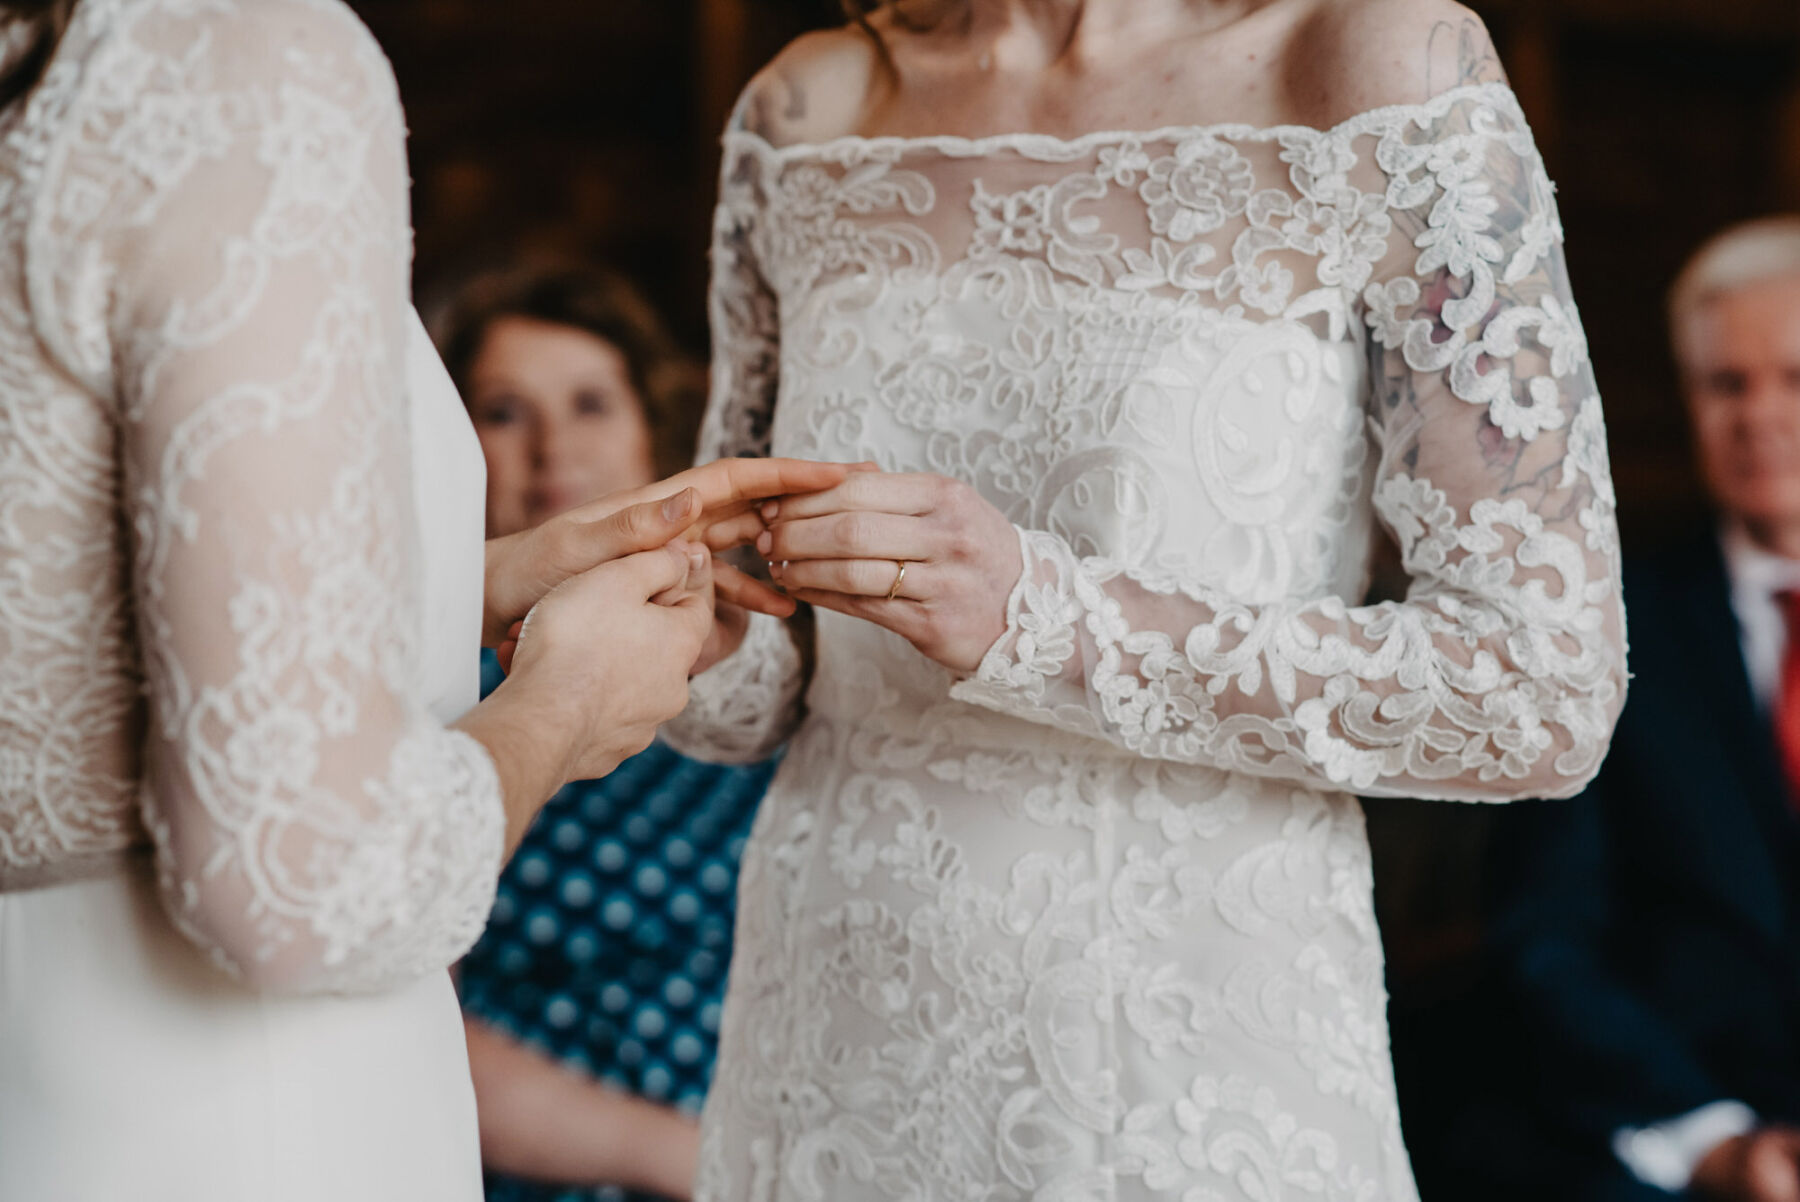 LGBTQ+ wedding - two brides exchanging rings during wedding ceremony. Jessica Grace Photography.